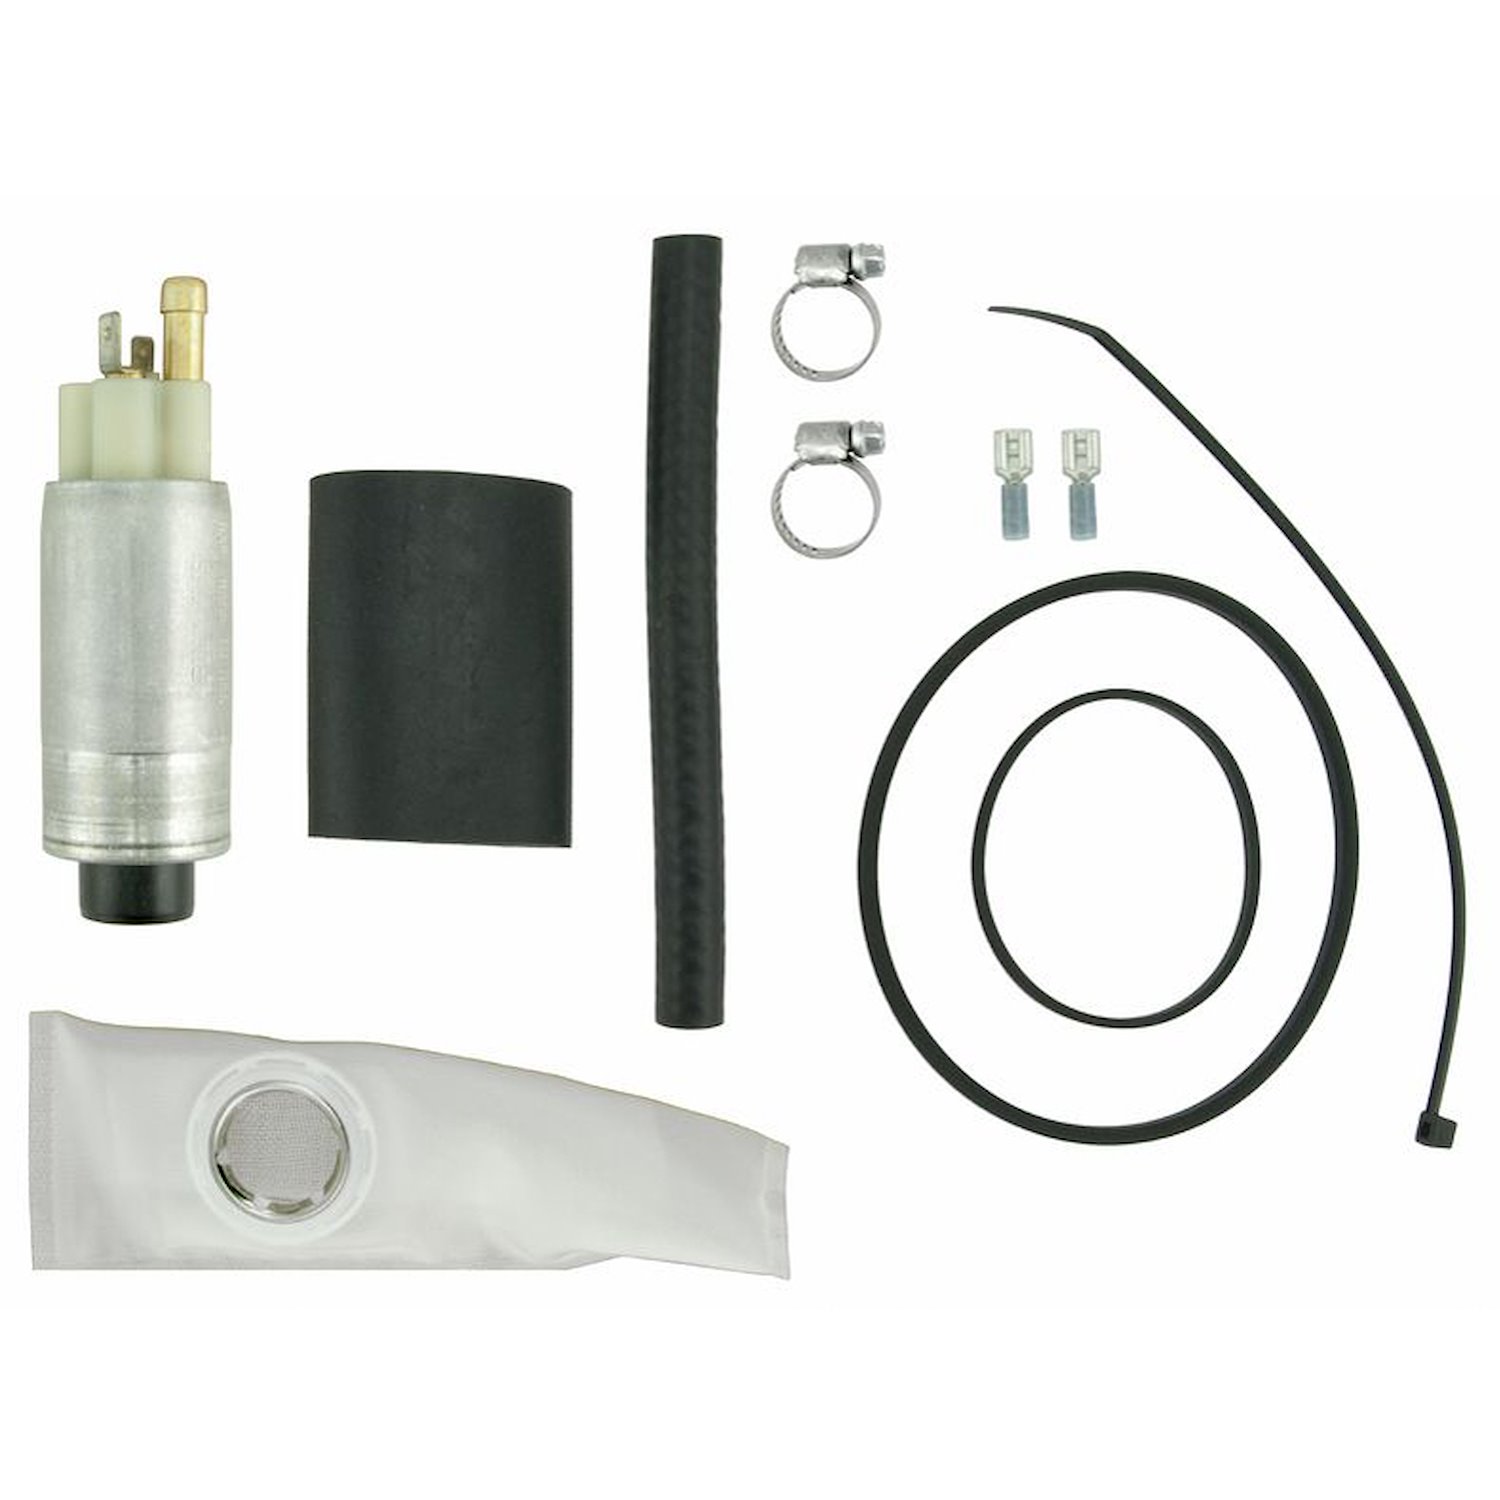 EFI In-Tank Electric Fuel Pump And Strainer Set for 1985 Dodge Aries/1985-1990 Ford Mustang